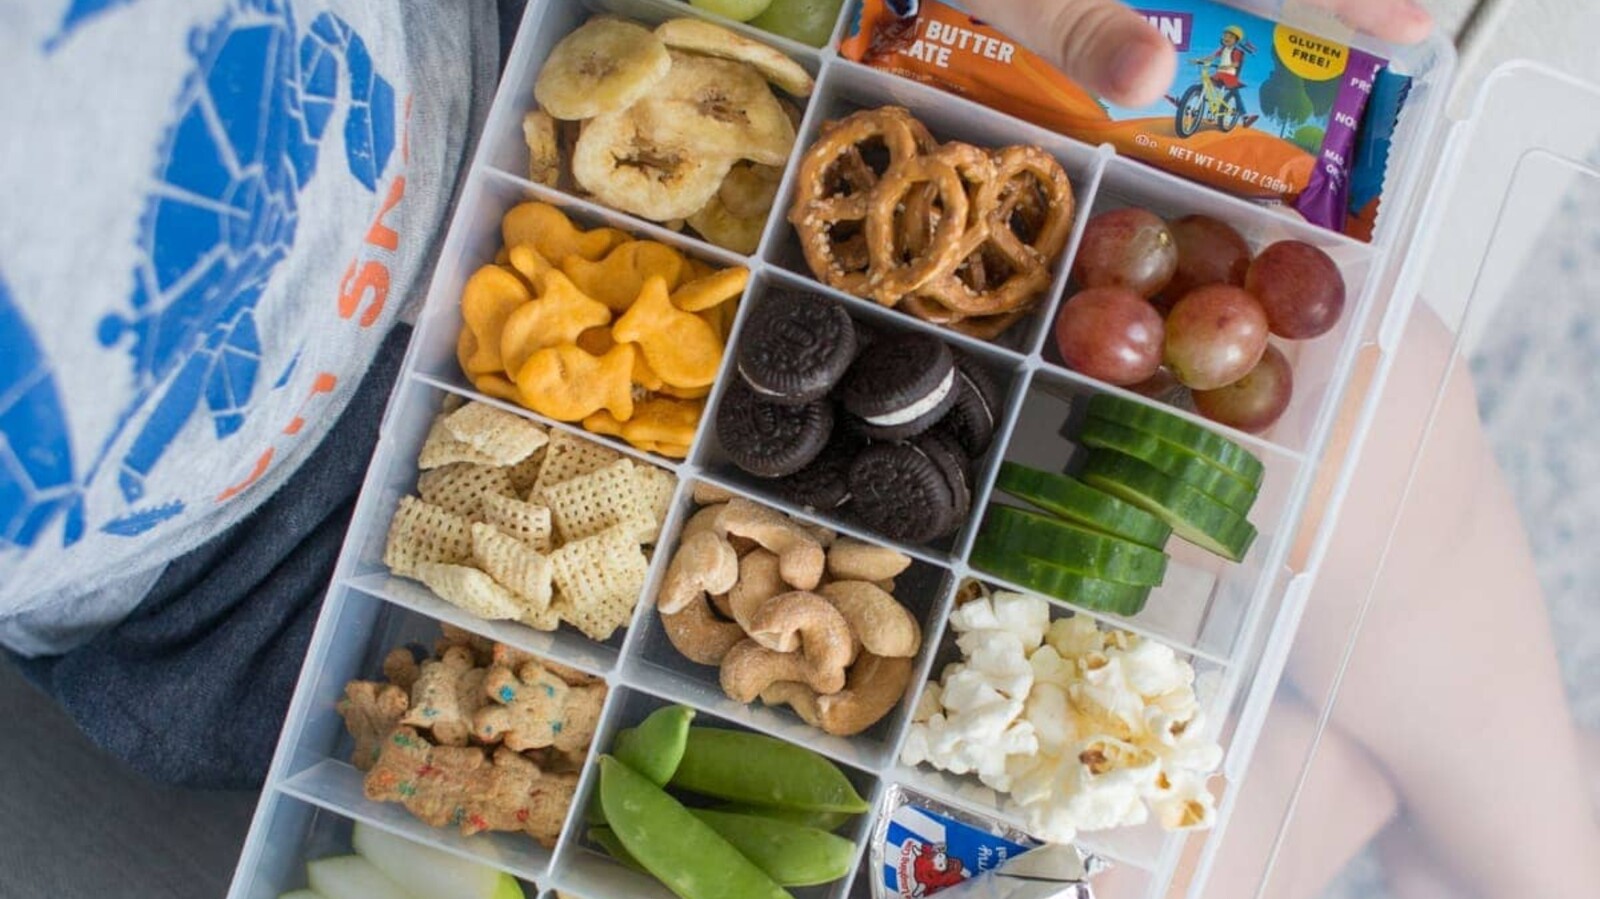 https://static.citylifestyle.com/articles/back-to-school-time-is-almost-here/snackle%20box%202-1600.jpg?v=1